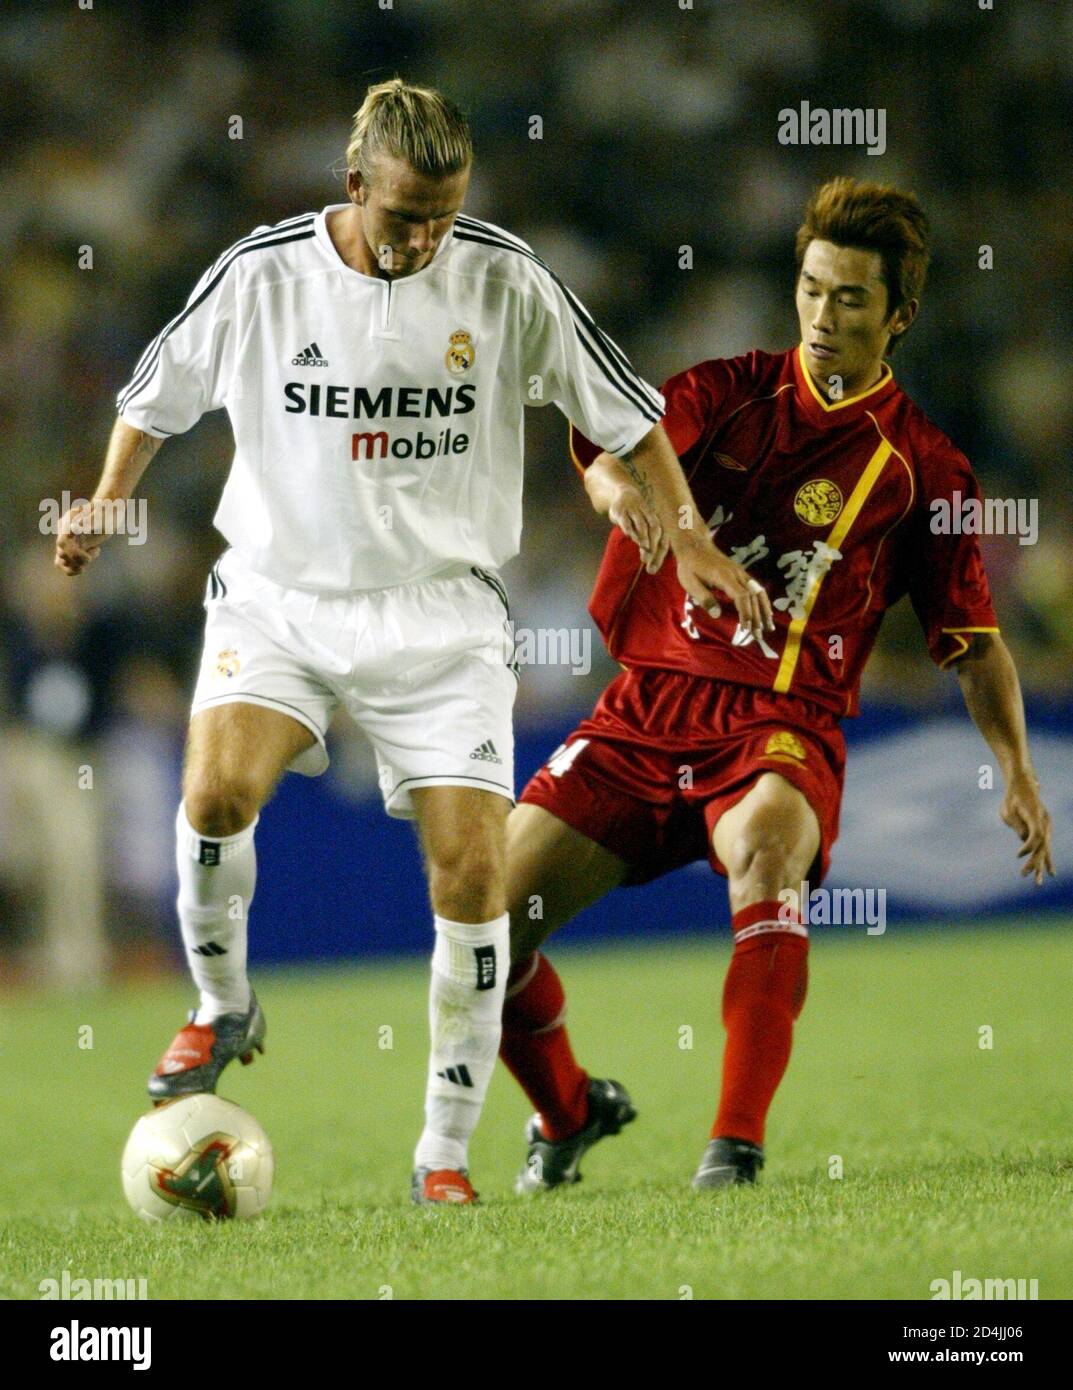 REAL MADRID'S DAVID BECKHAM FIGHTS FOR THE BALL WITH SHANG YI OF CHINA'S  DRAGON TEAM DURING A PROMOTIONAL MATCH AT THE WORKERS' STADIUM IN BEIJING.  Real Madrid's David Beckham (L) fights for